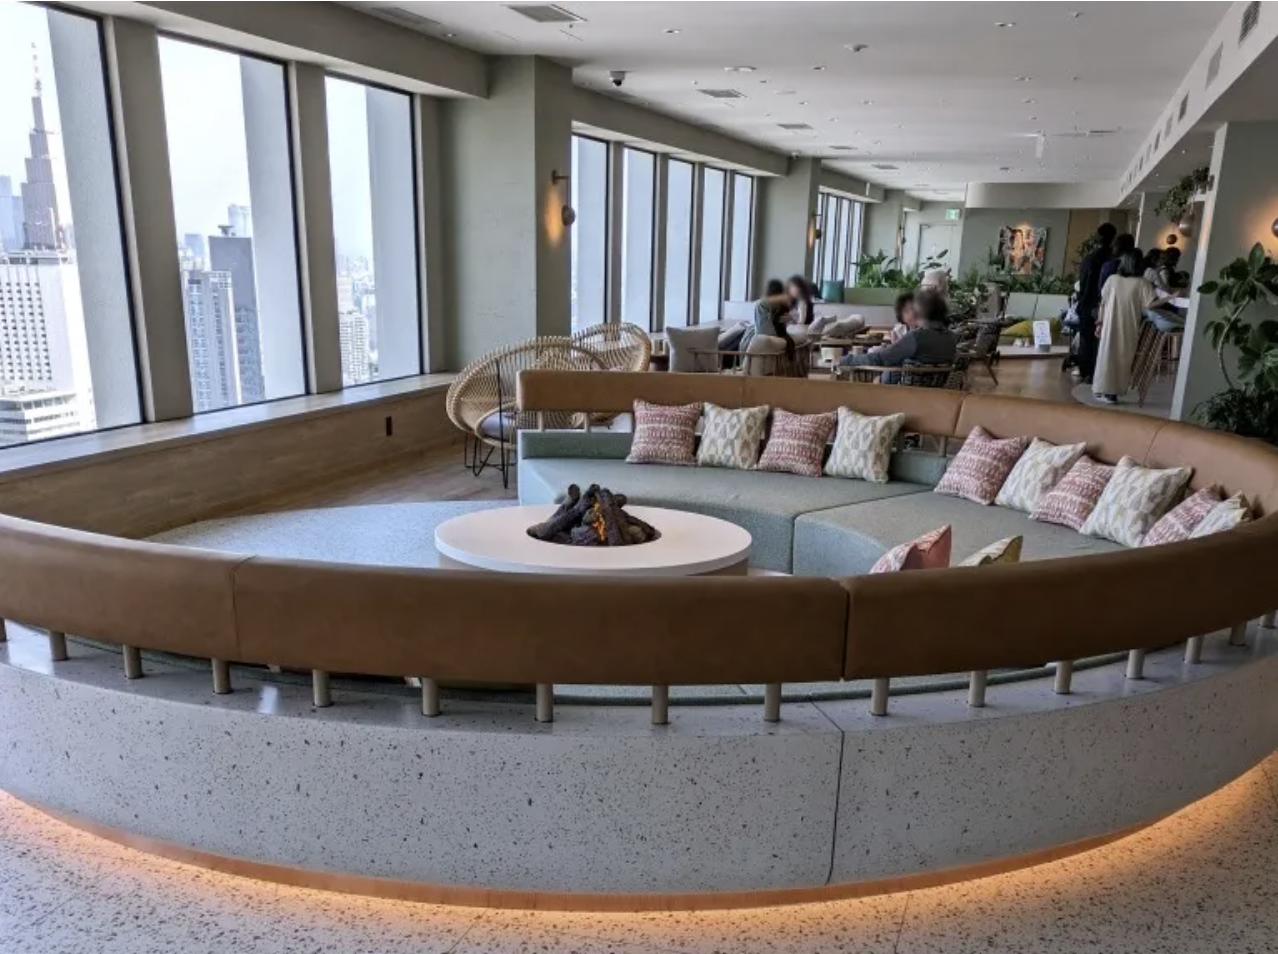 All-you-can-drink Starbucks and amazing views part of Tokyo’s new 170 meter-high sky lounge